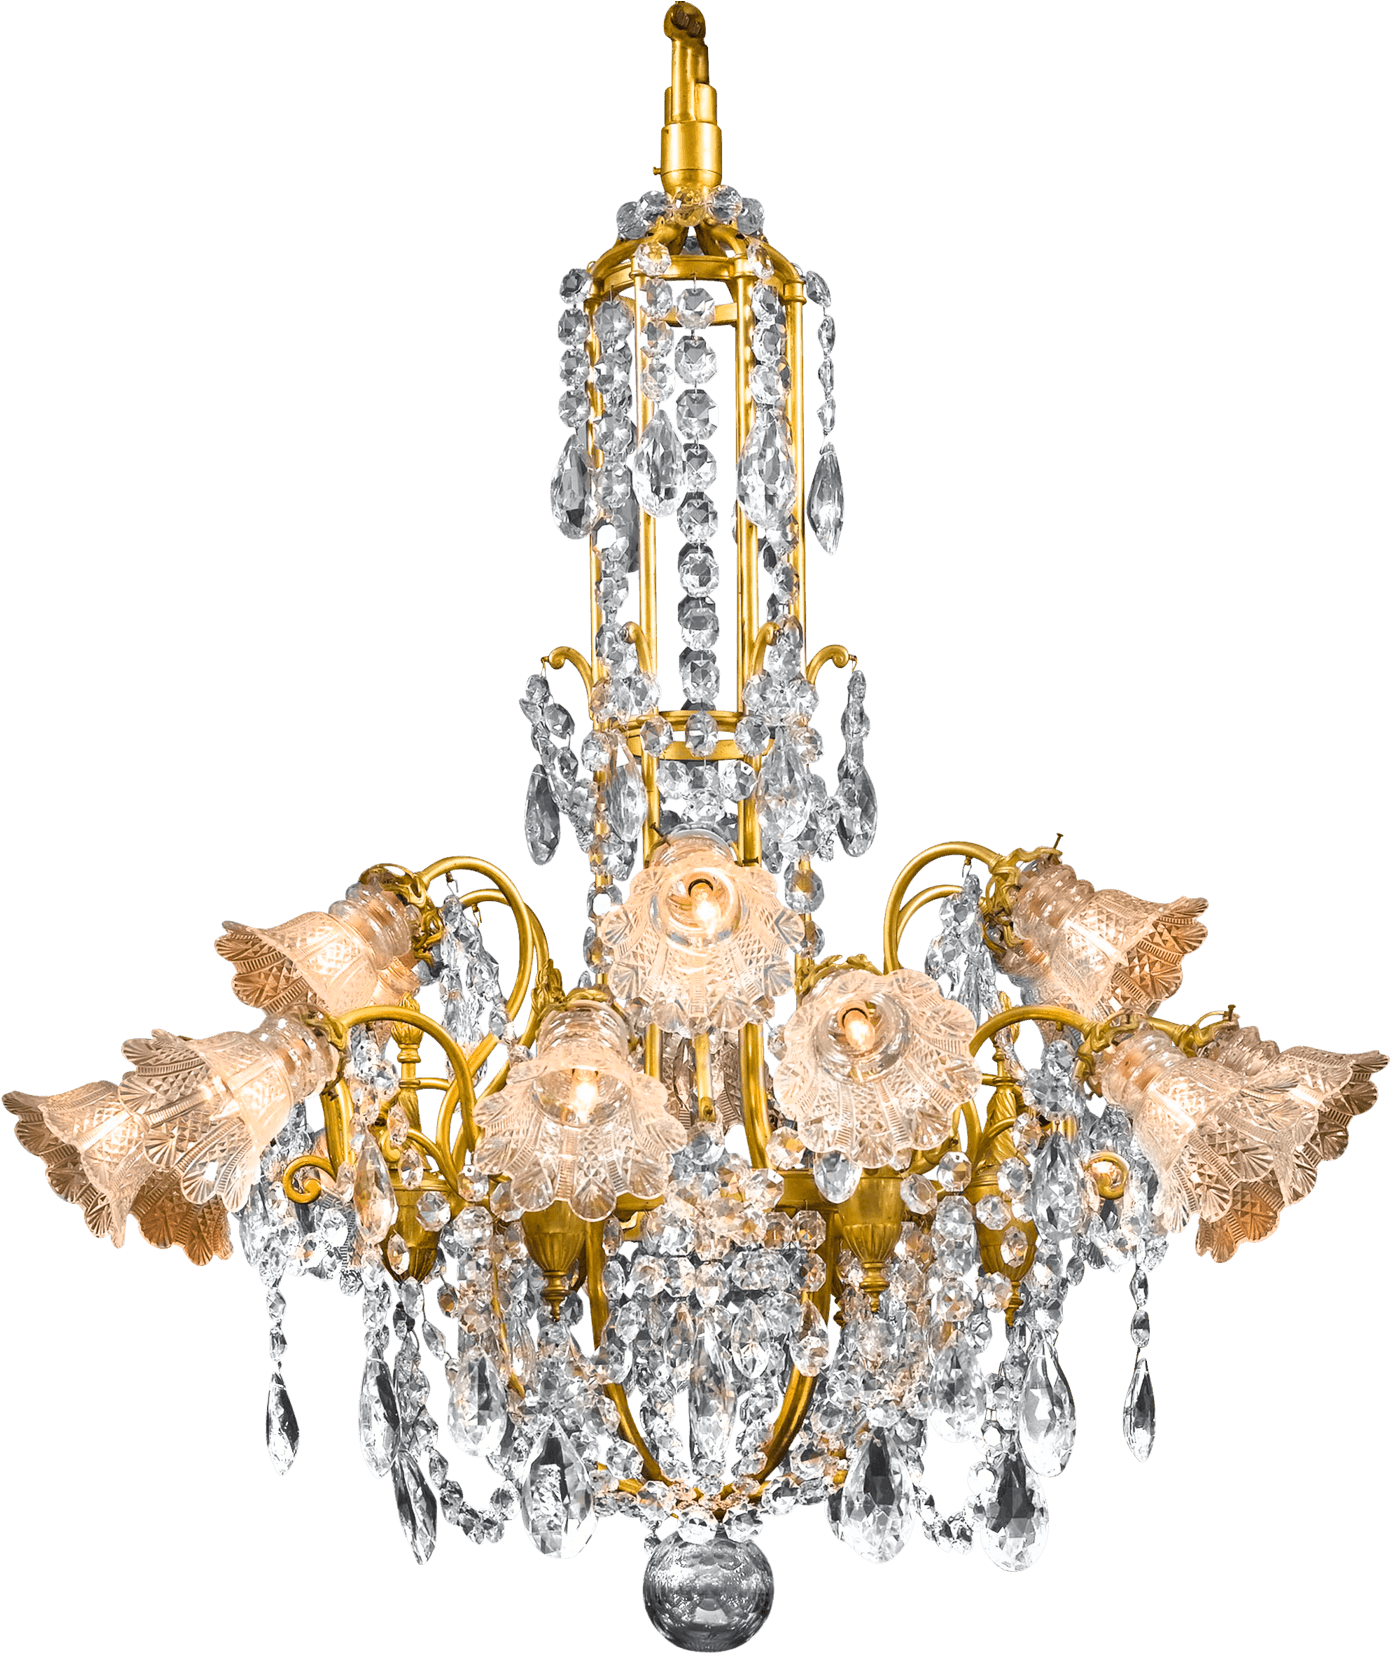 A Chandelier With Crystal From The Ceiling